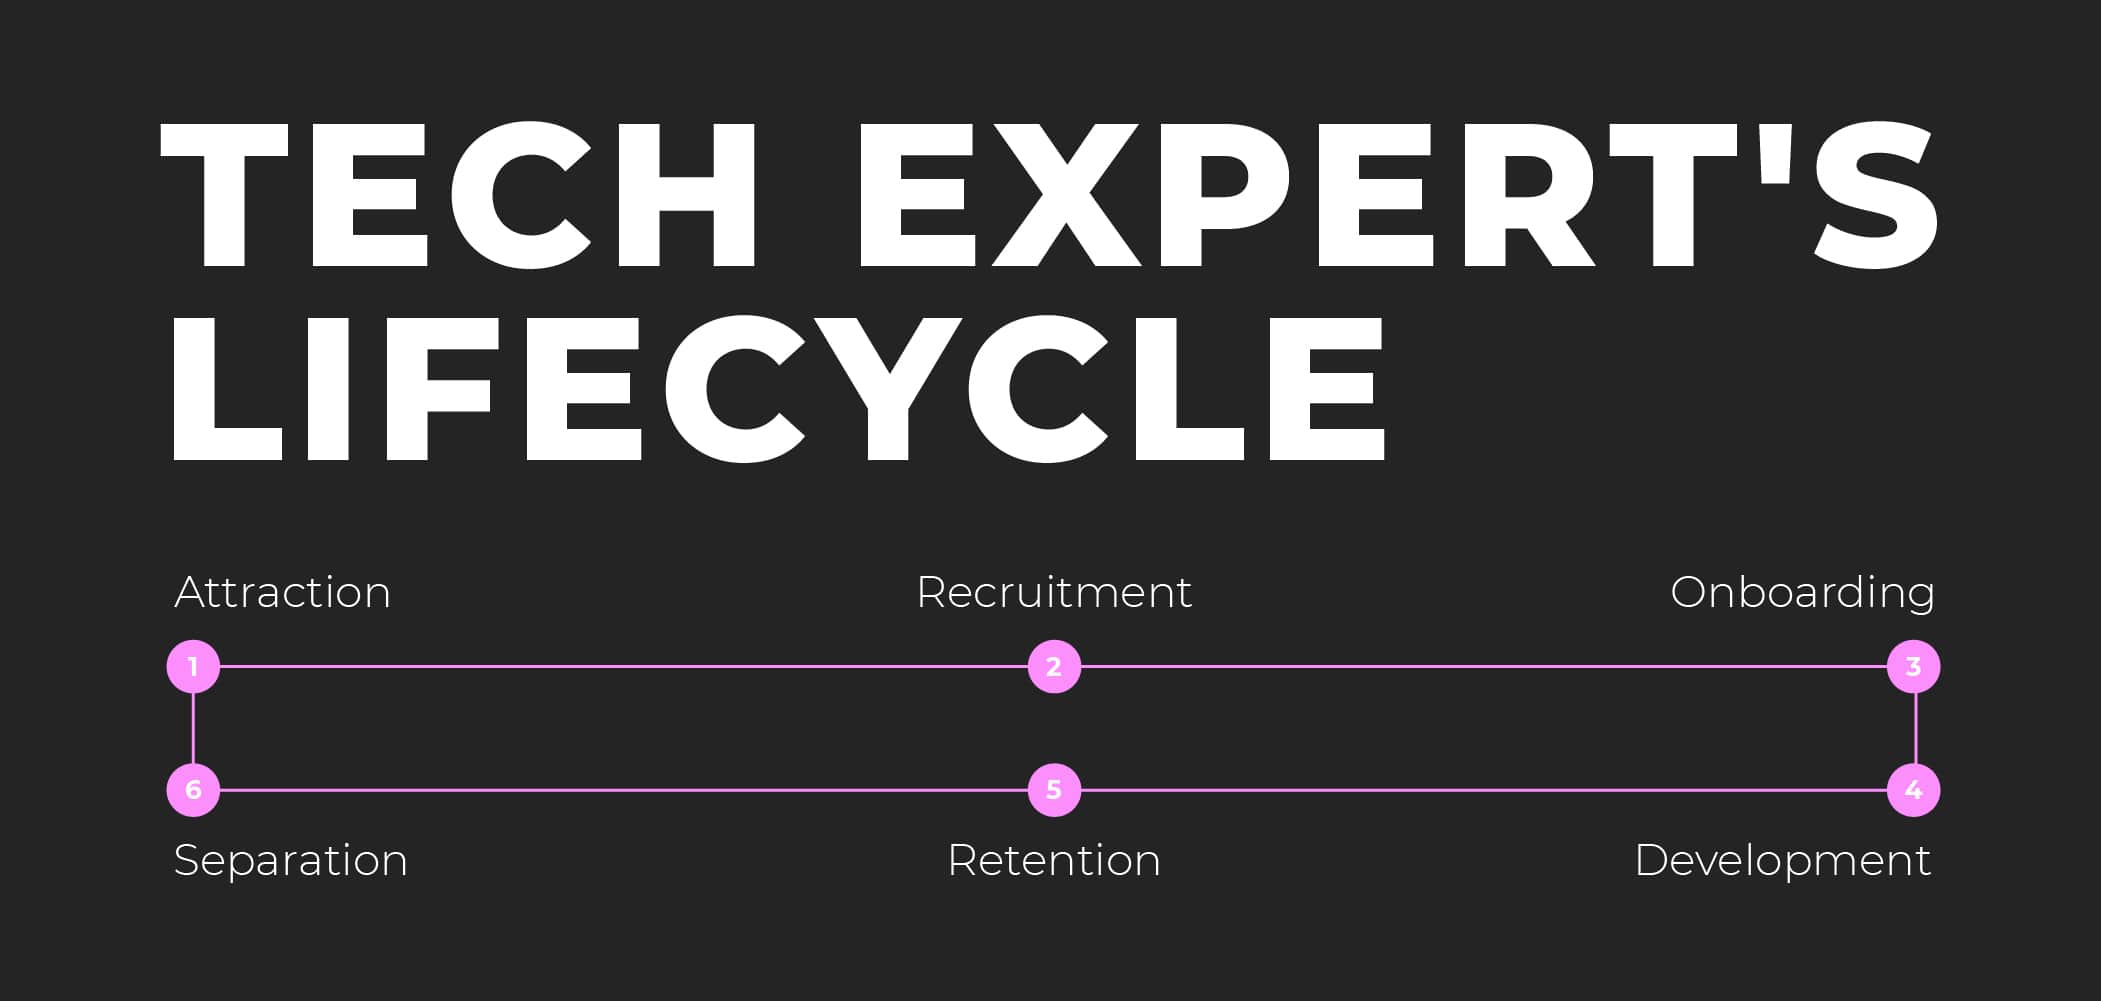 Knowing the lifecycle of tech experts is key to successful retention strategy